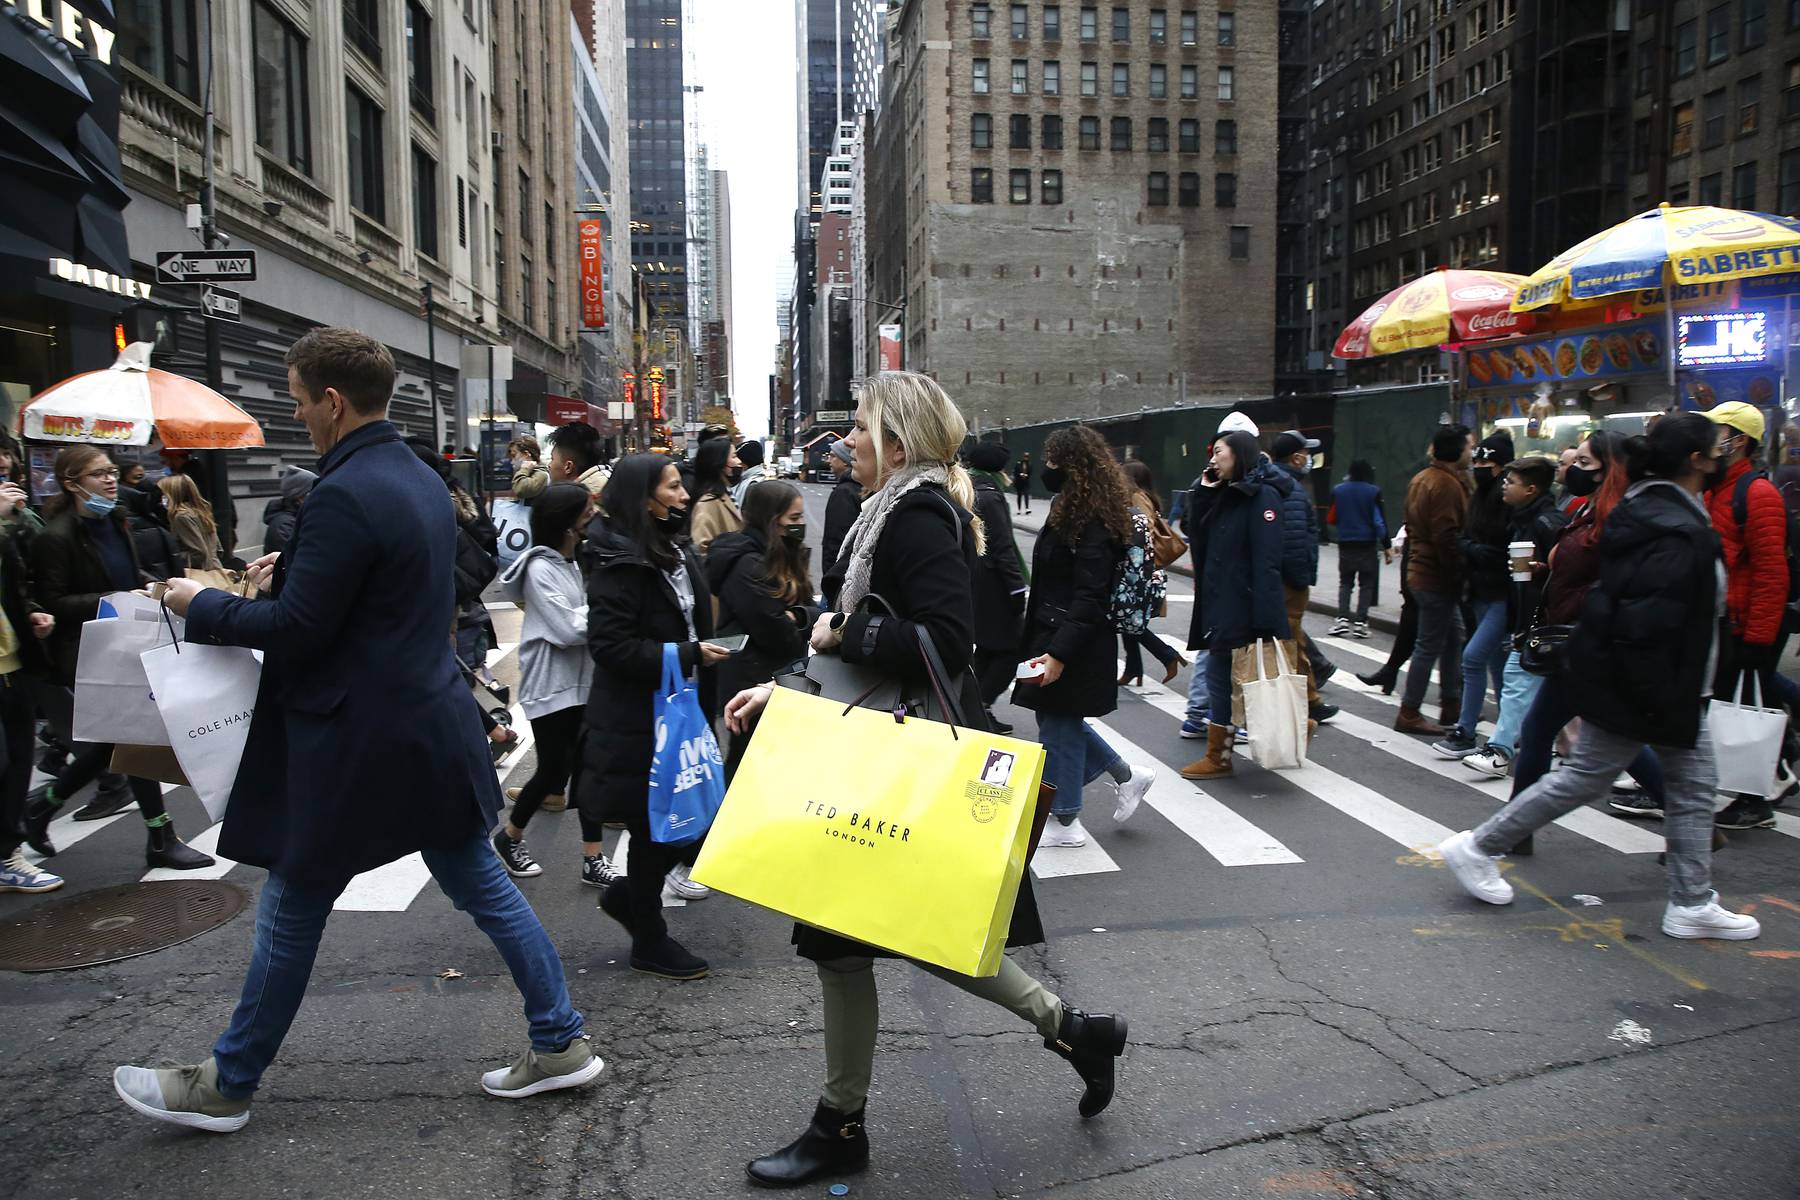 Retailers are hoping for another busy Black Friday this year.